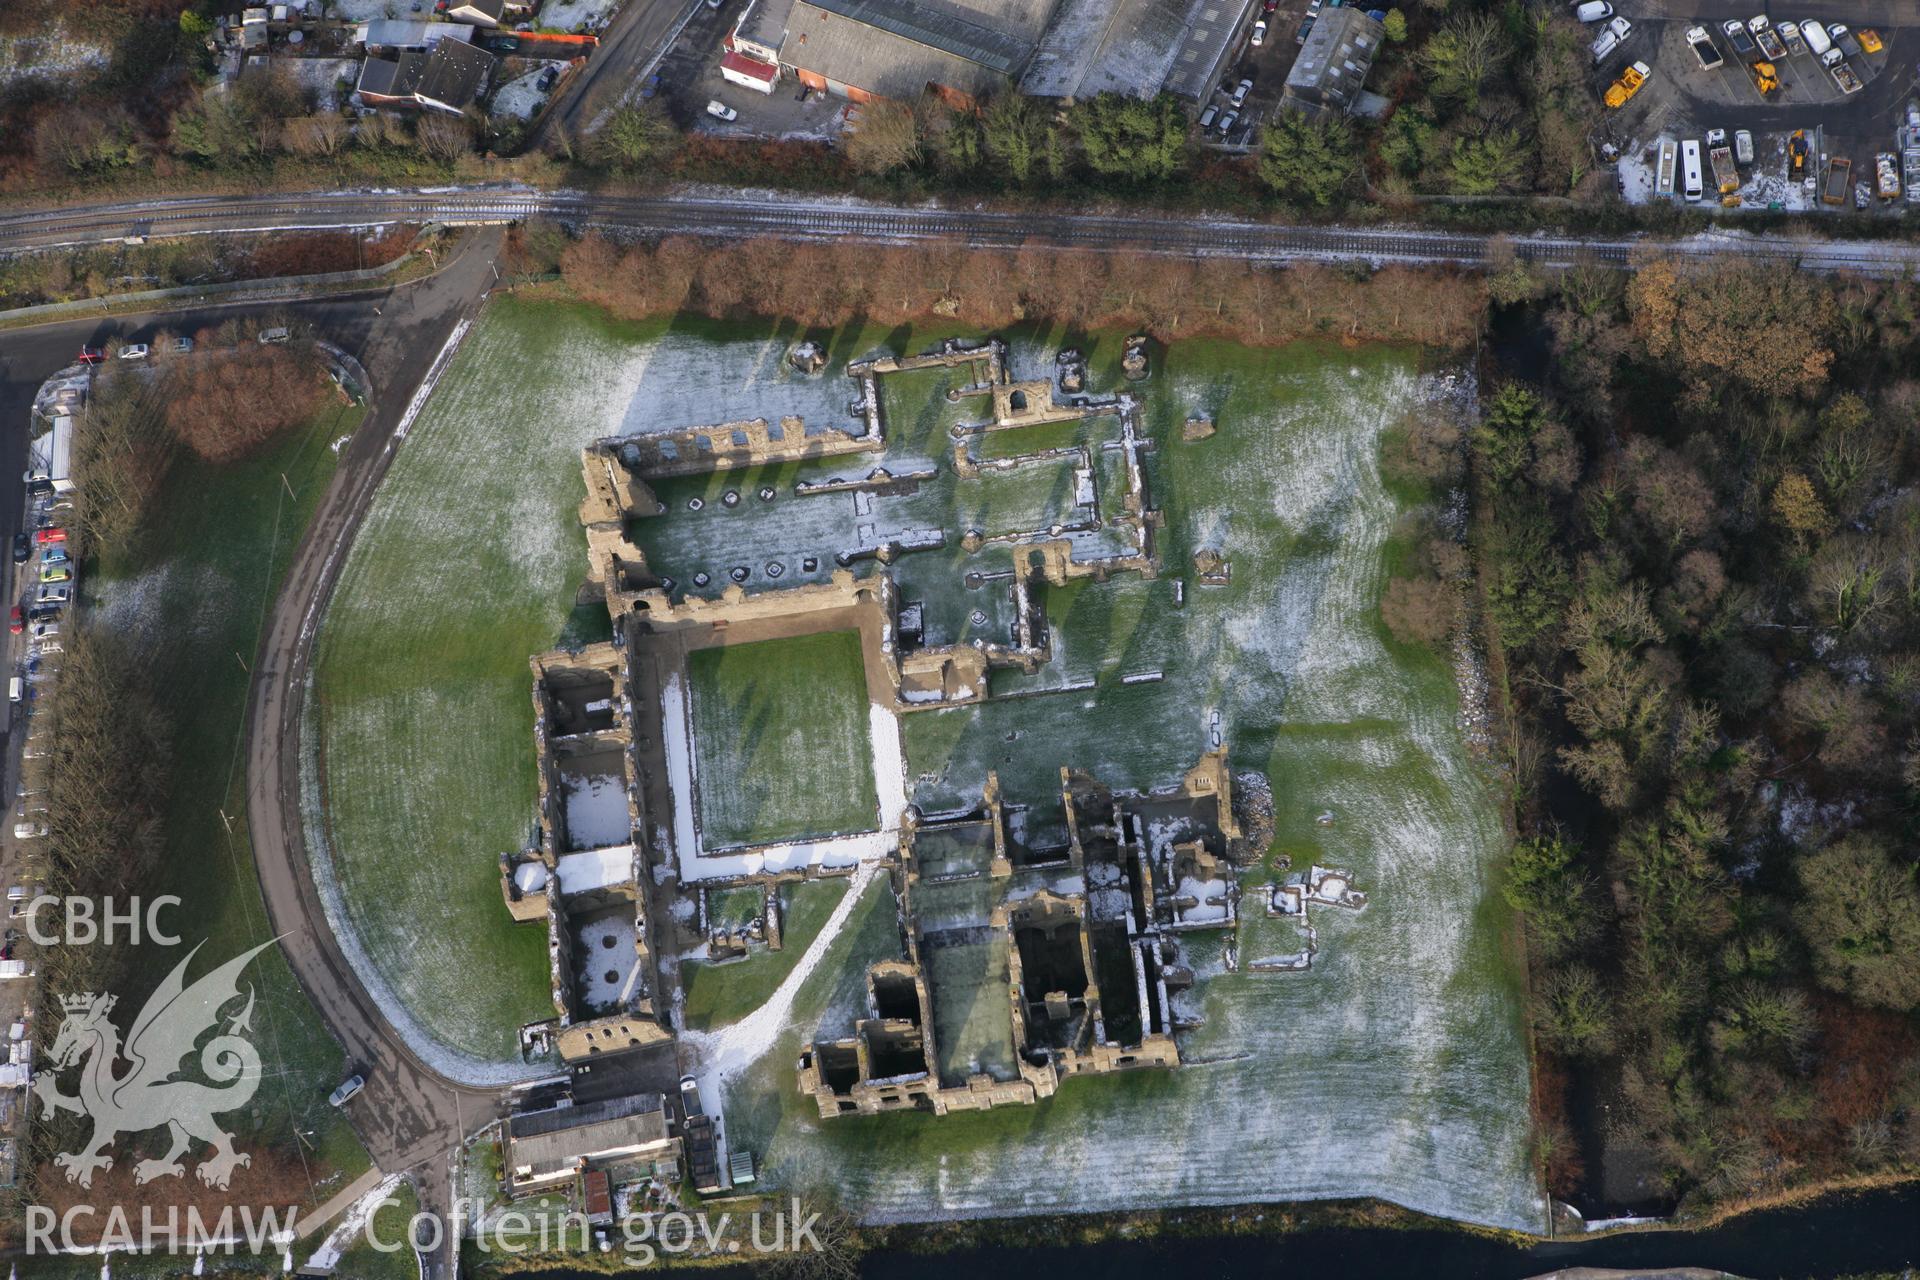 RCAHMW colour oblique photograph of Neath Abbey, with melting snow. Taken by Toby Driver on 01/12/2010.